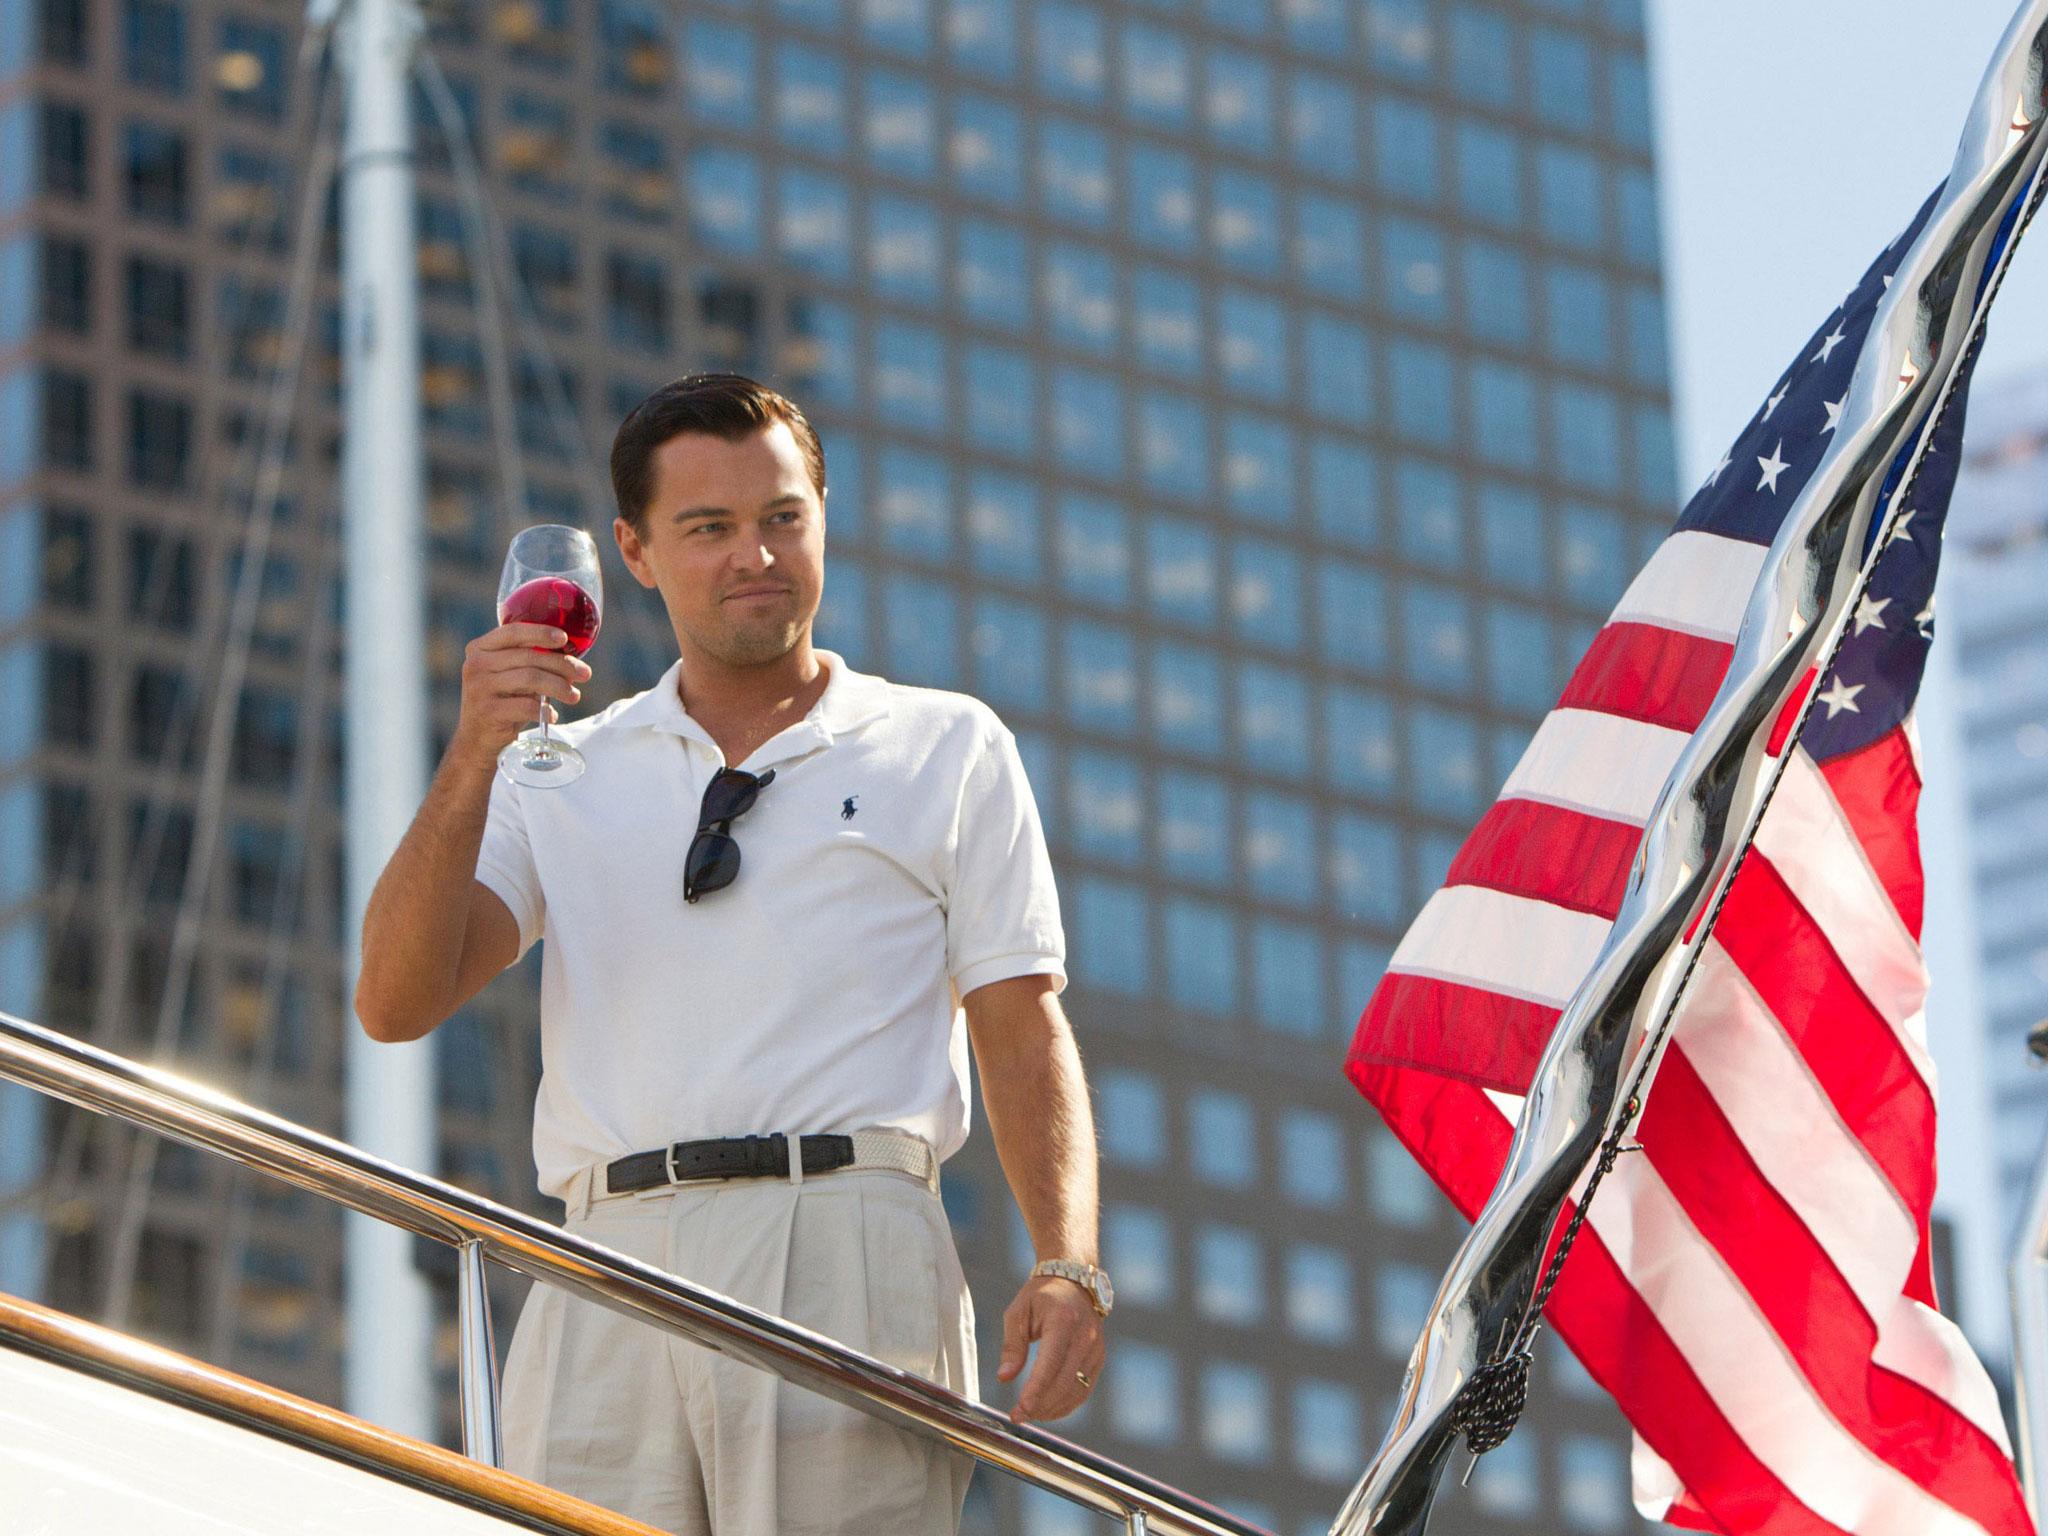 Leonardo Di Caprio plays Belfort in 'The Wolf of Wall Street', which is based on the author's memoir (AP)